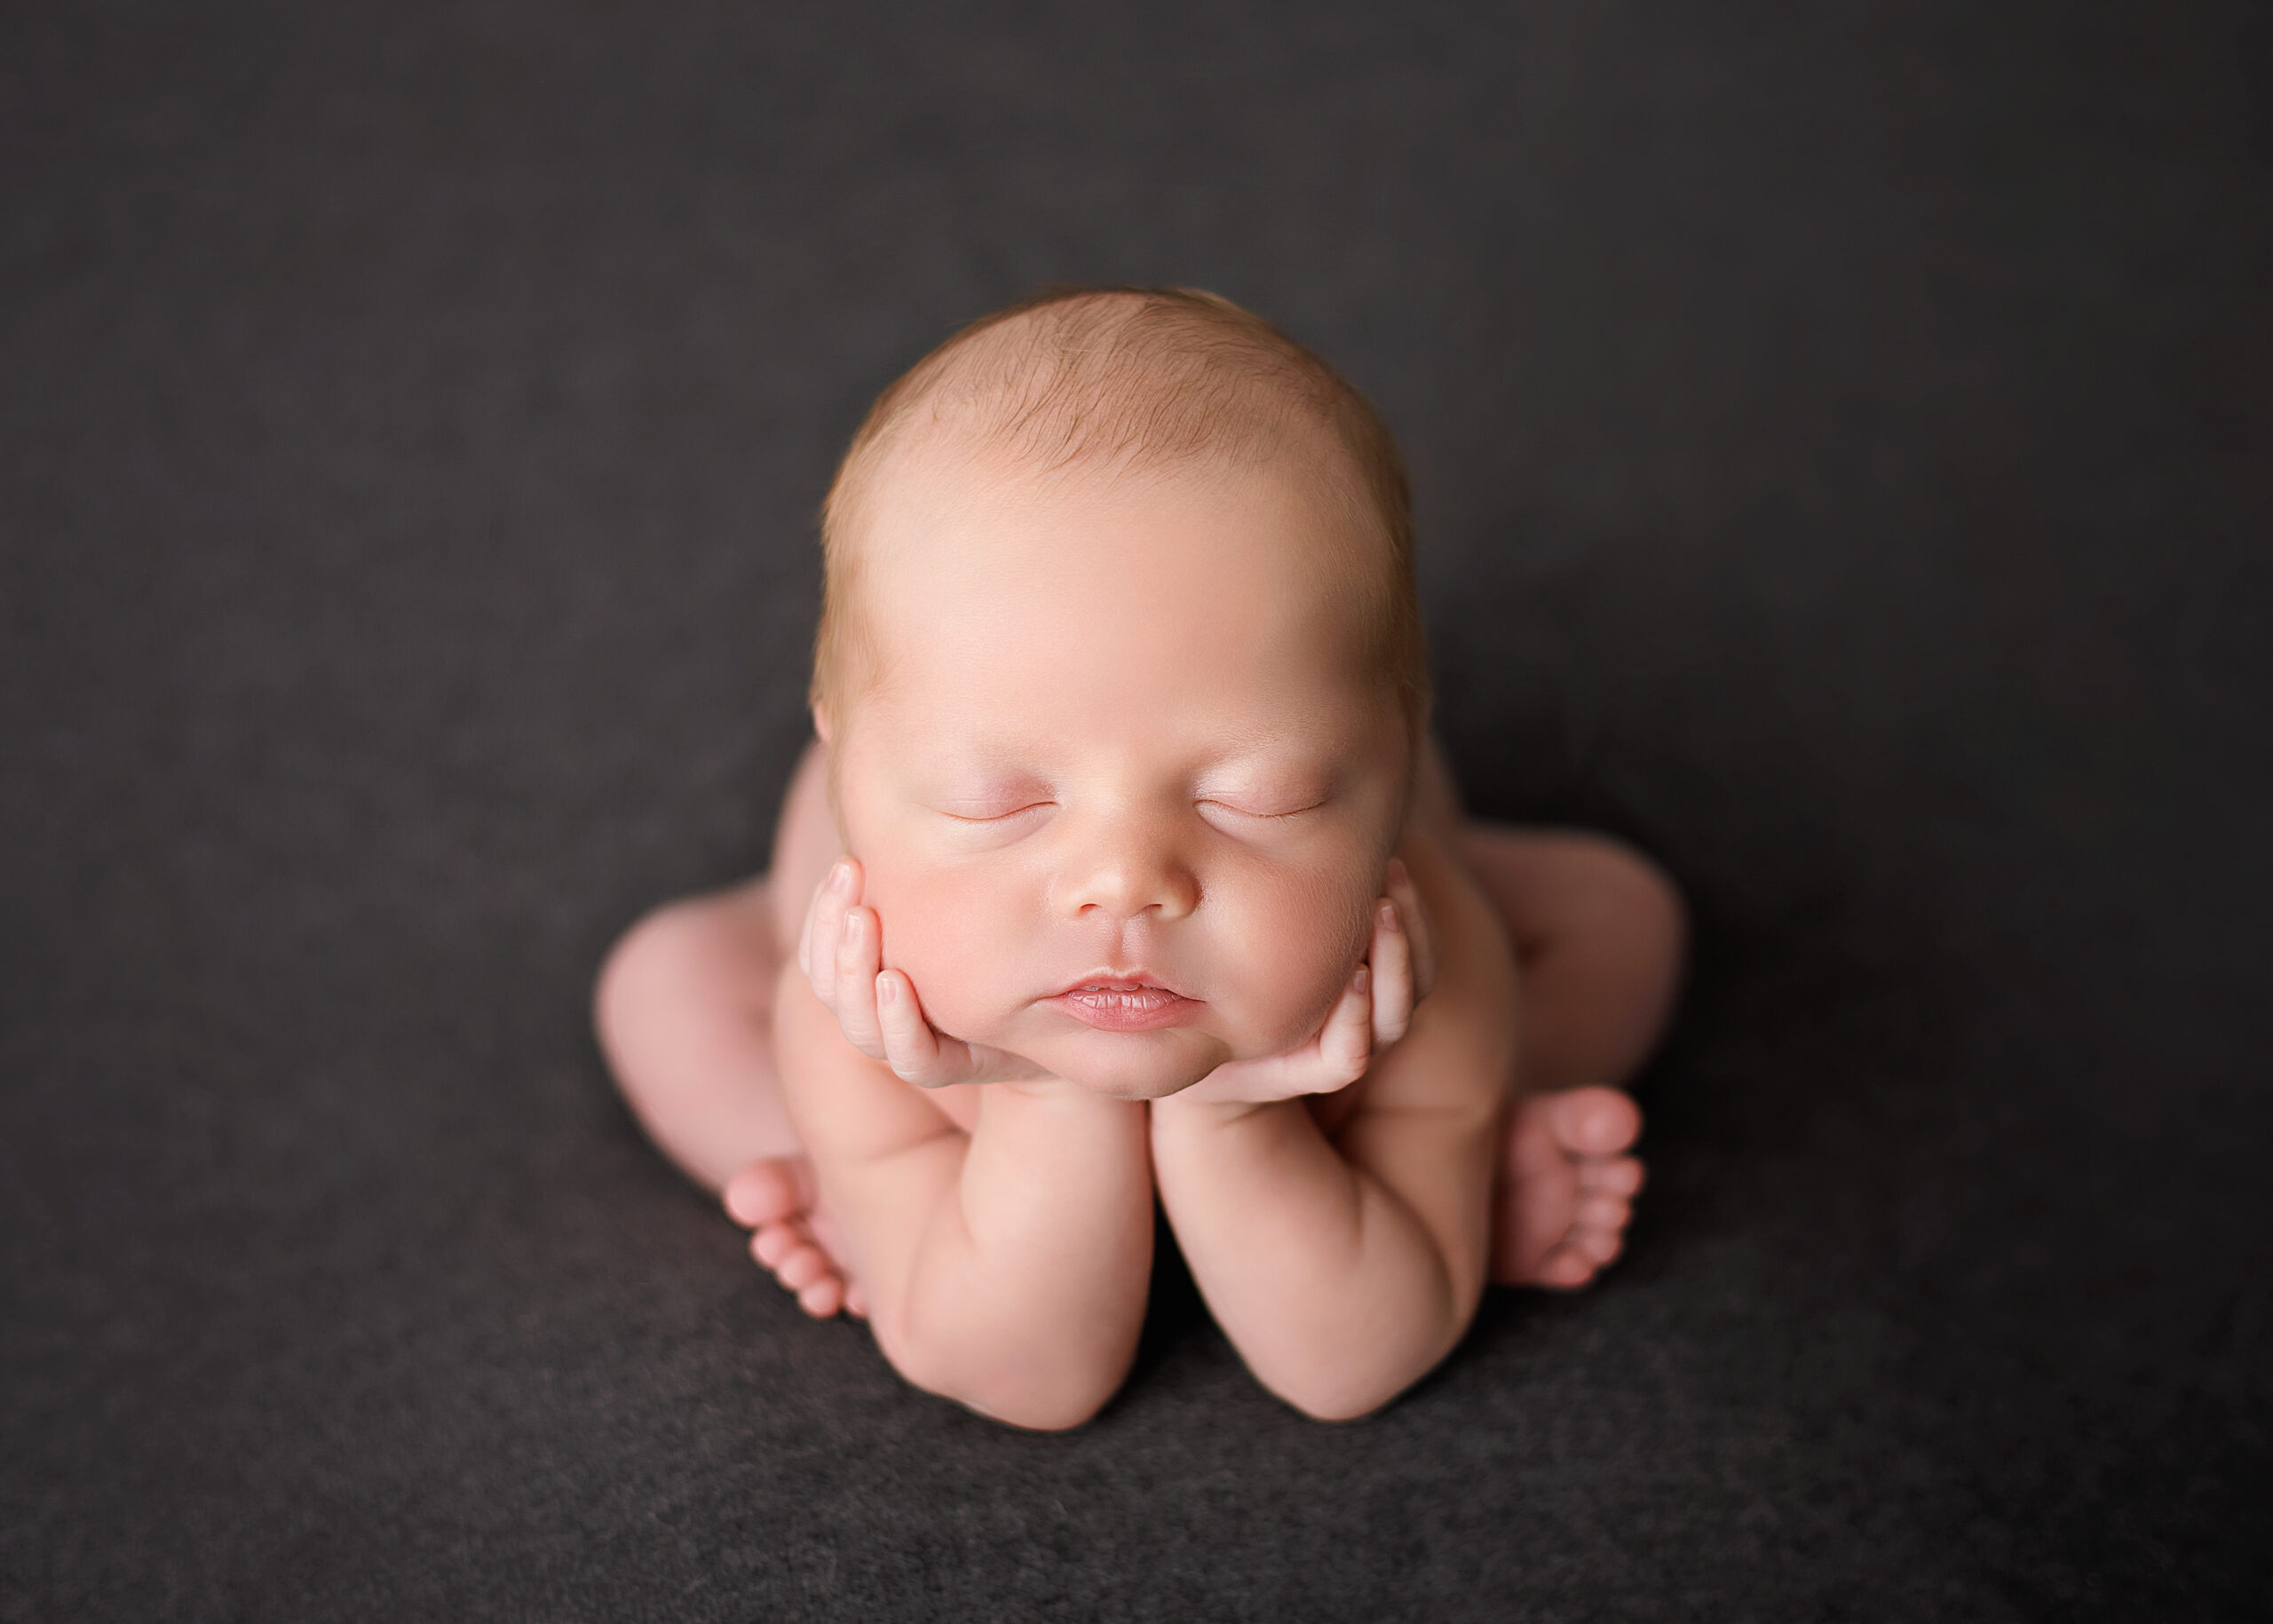 newborn baby posed for a photoshoot Choosing the Perfect Time for Newborn Photos